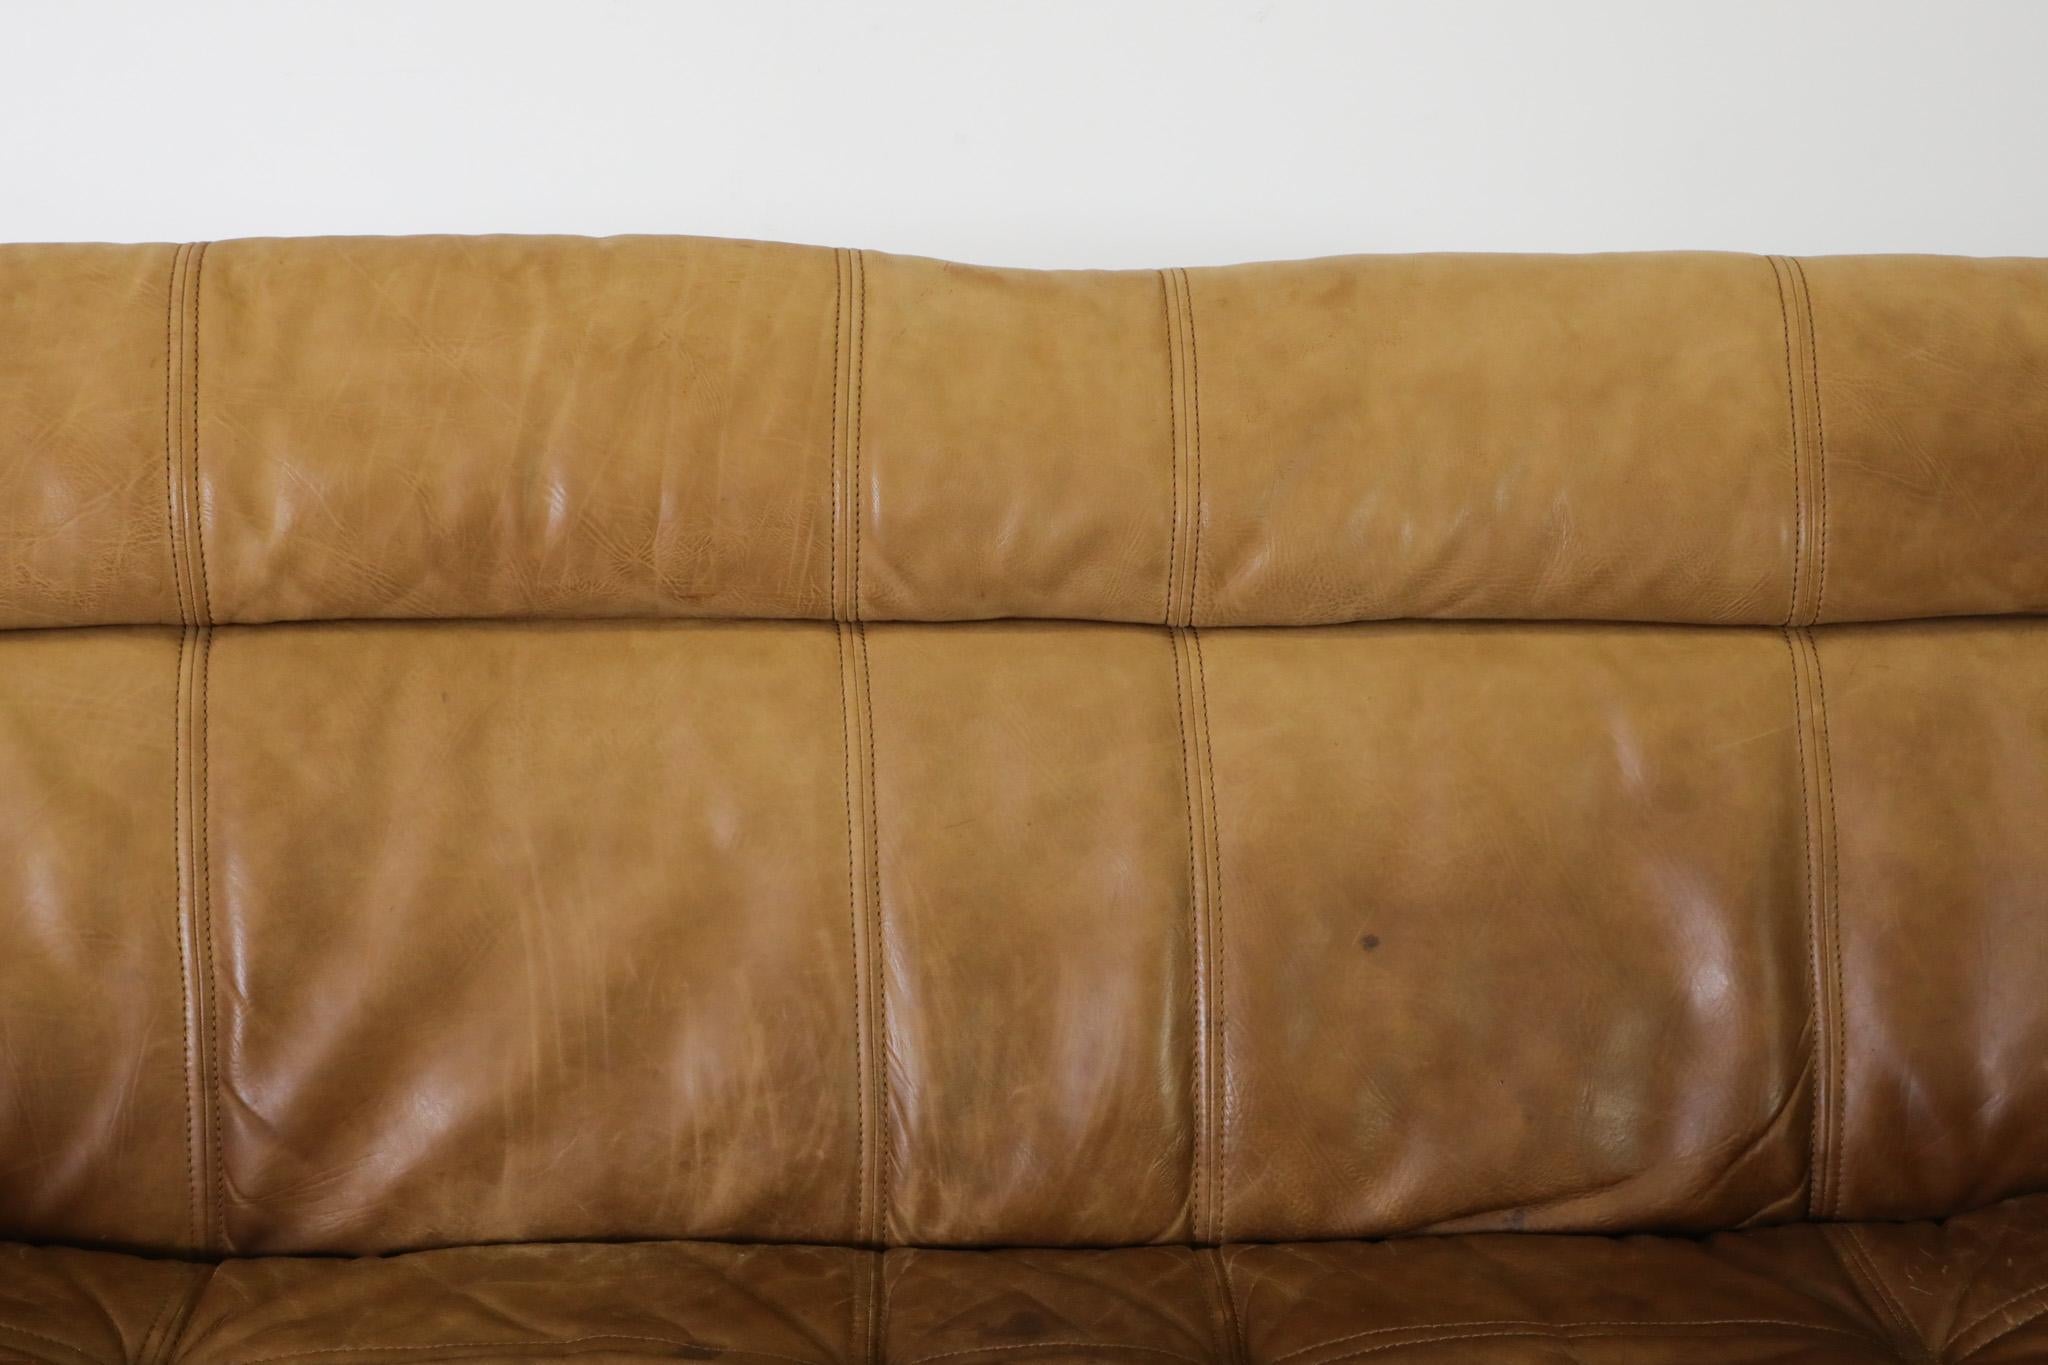 Rolf Benz Soft Form Buck Leather Loveseats, 1970s For Sale 11